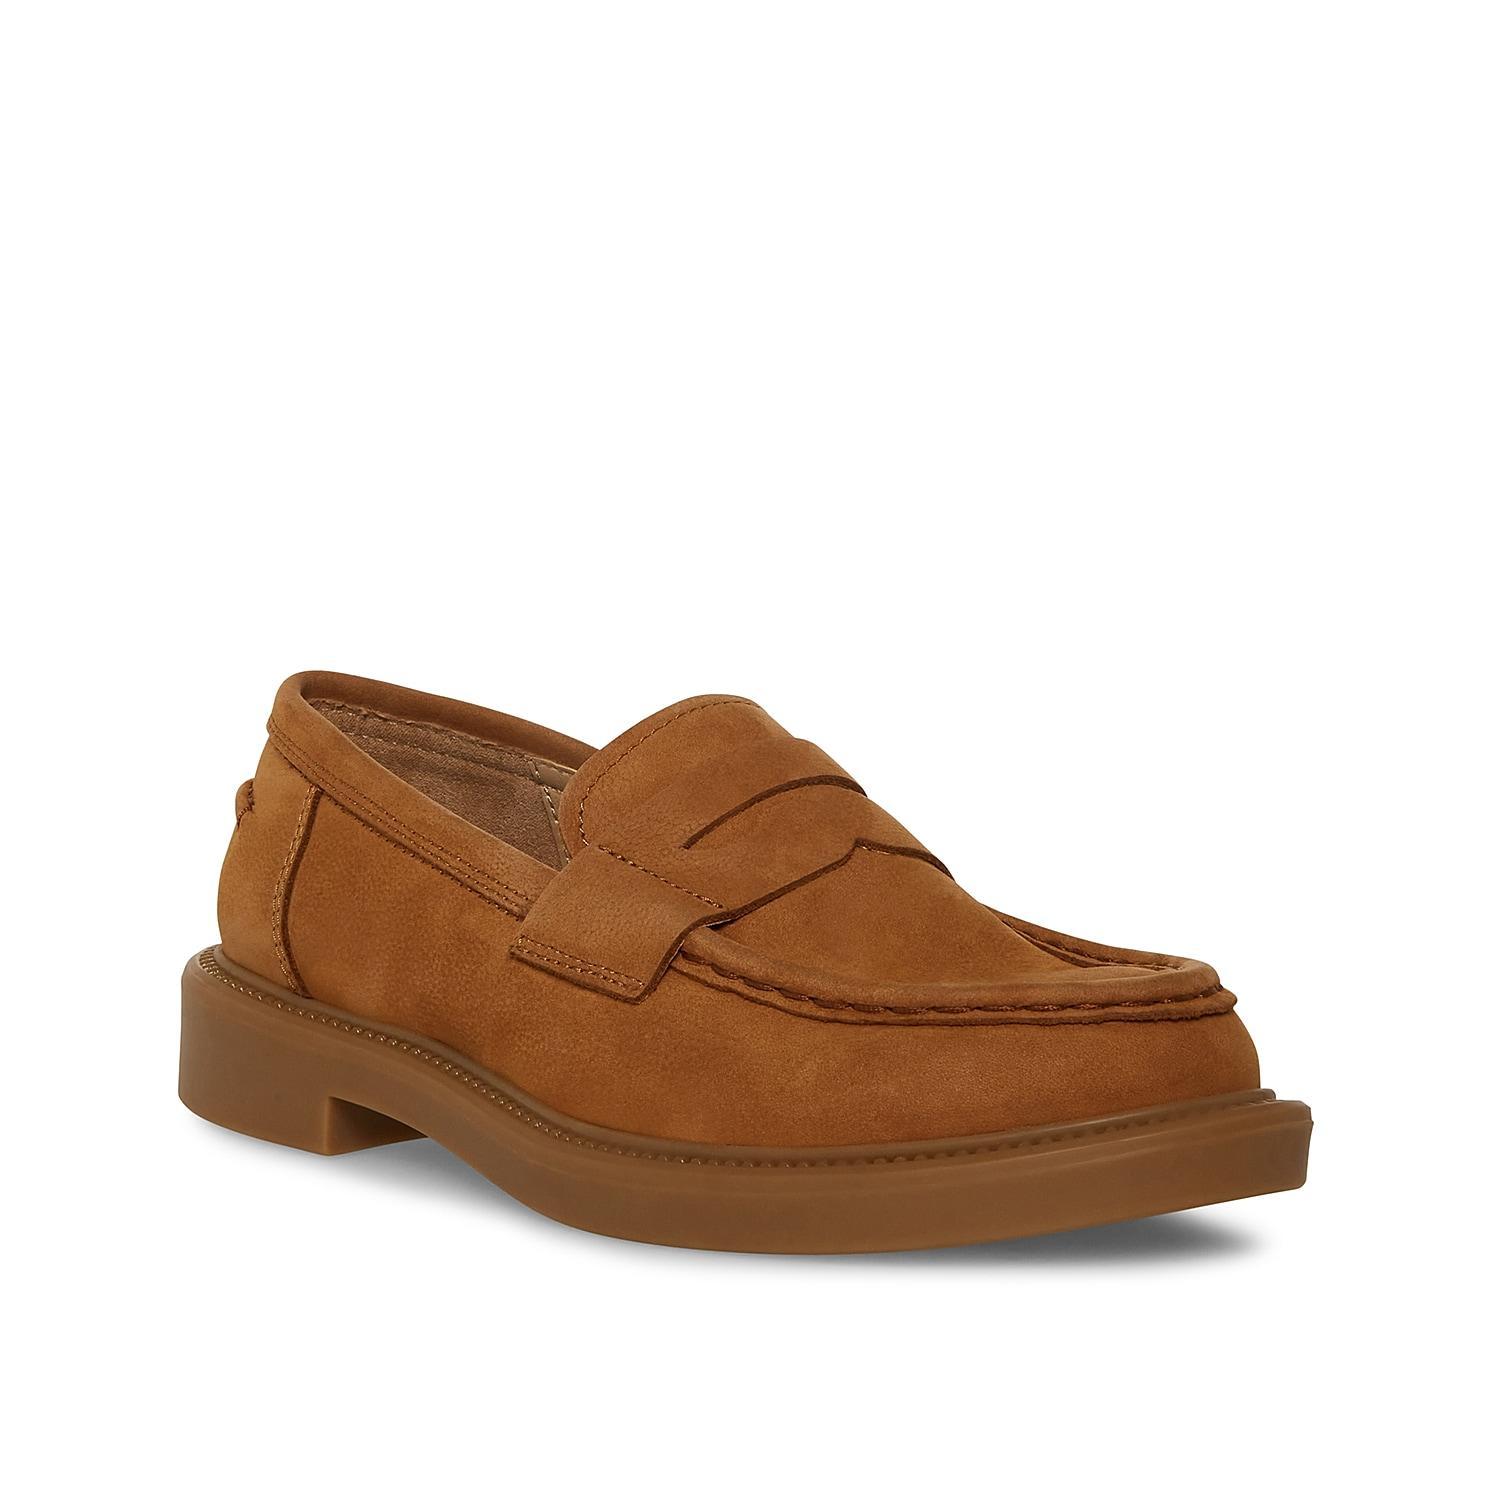 Blondo Halo Waterproof Loafer Product Image